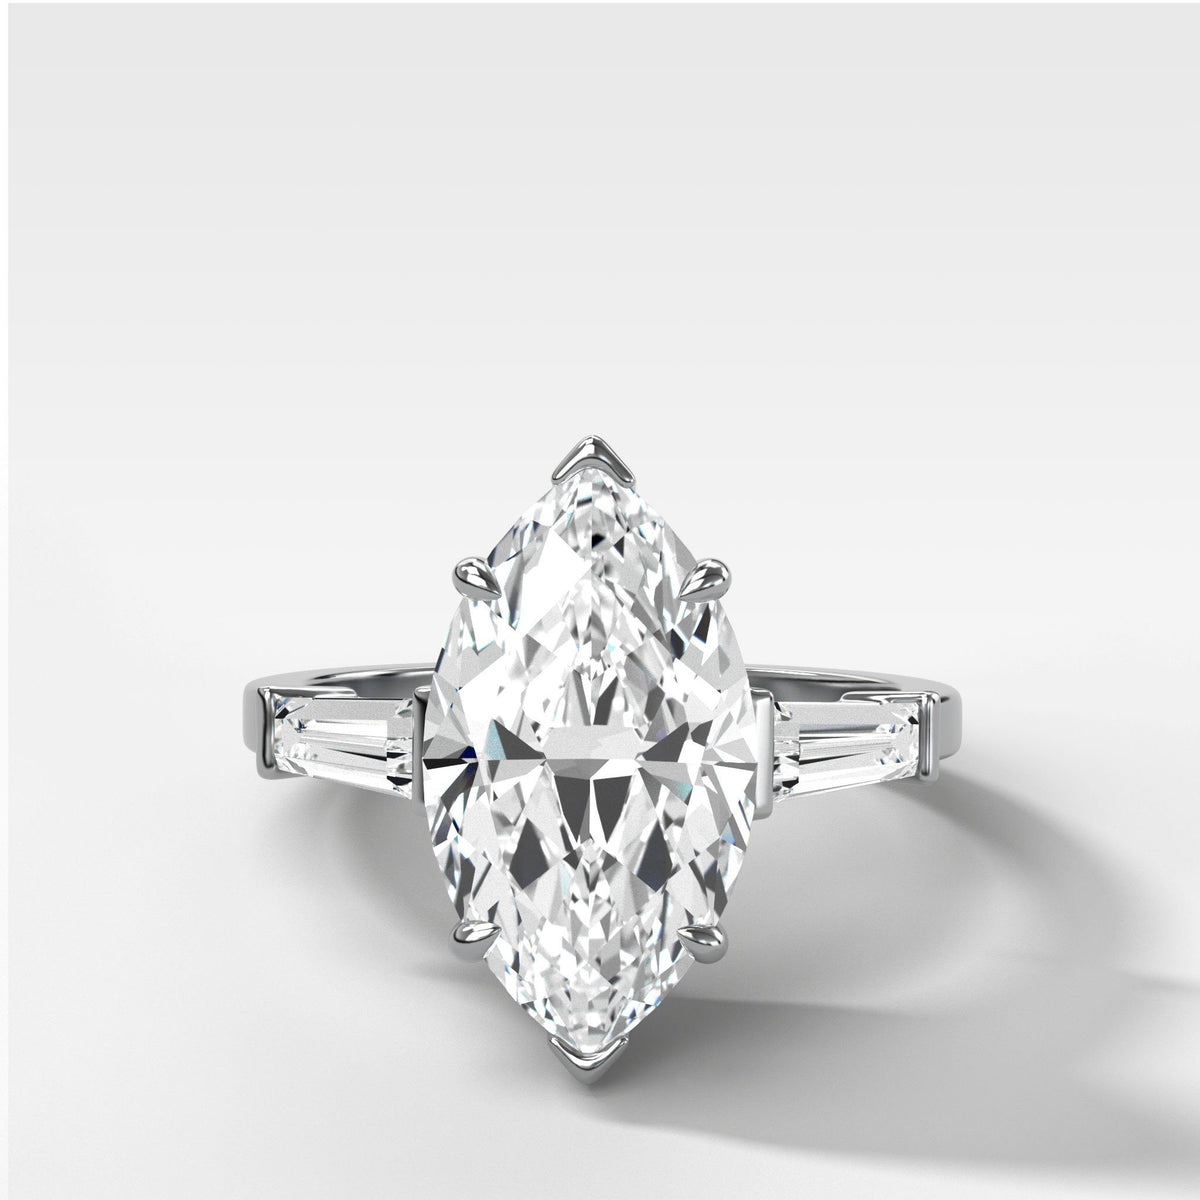 Translunar Tapered Baguette Engagement Ring With Marquise Cut by Good Stone in White Gold